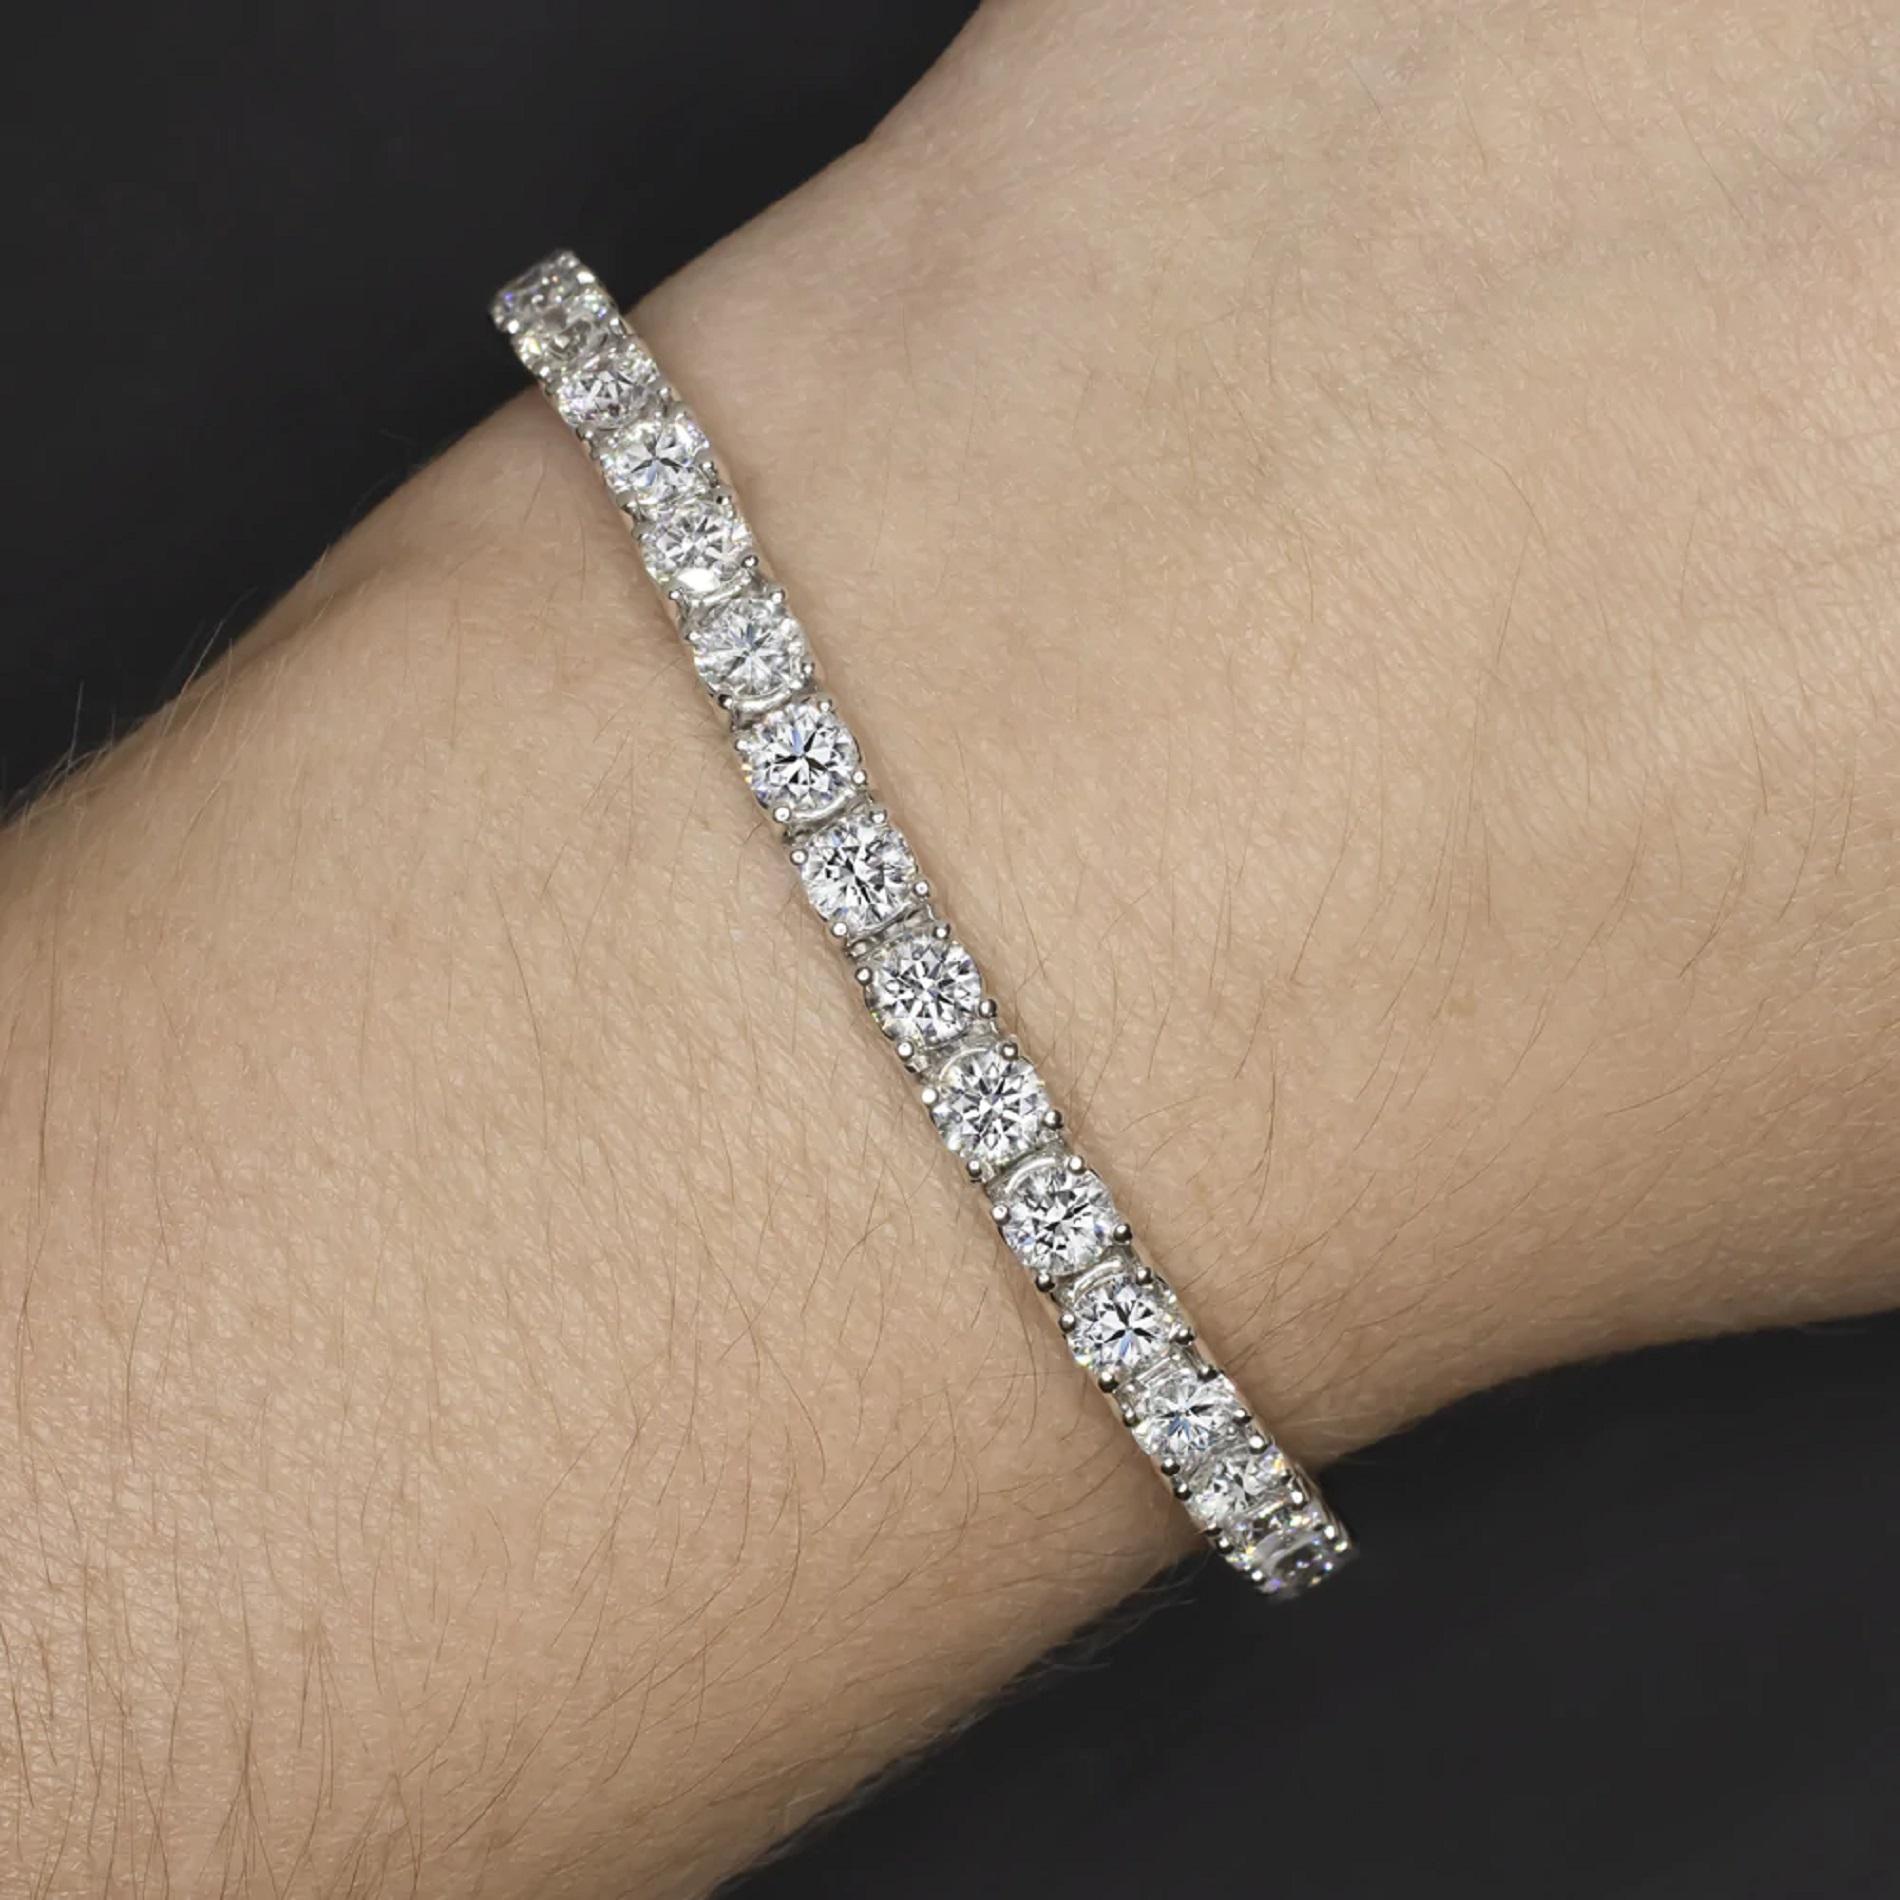 brilliantly sparkling tennis bracelet has a classic design that will never go out of style! Featuring This gorgeous diamond tennis bracelet has an interesting 4 prong airline design. It also features 32 round diamonds totaling 16 carats. The size of